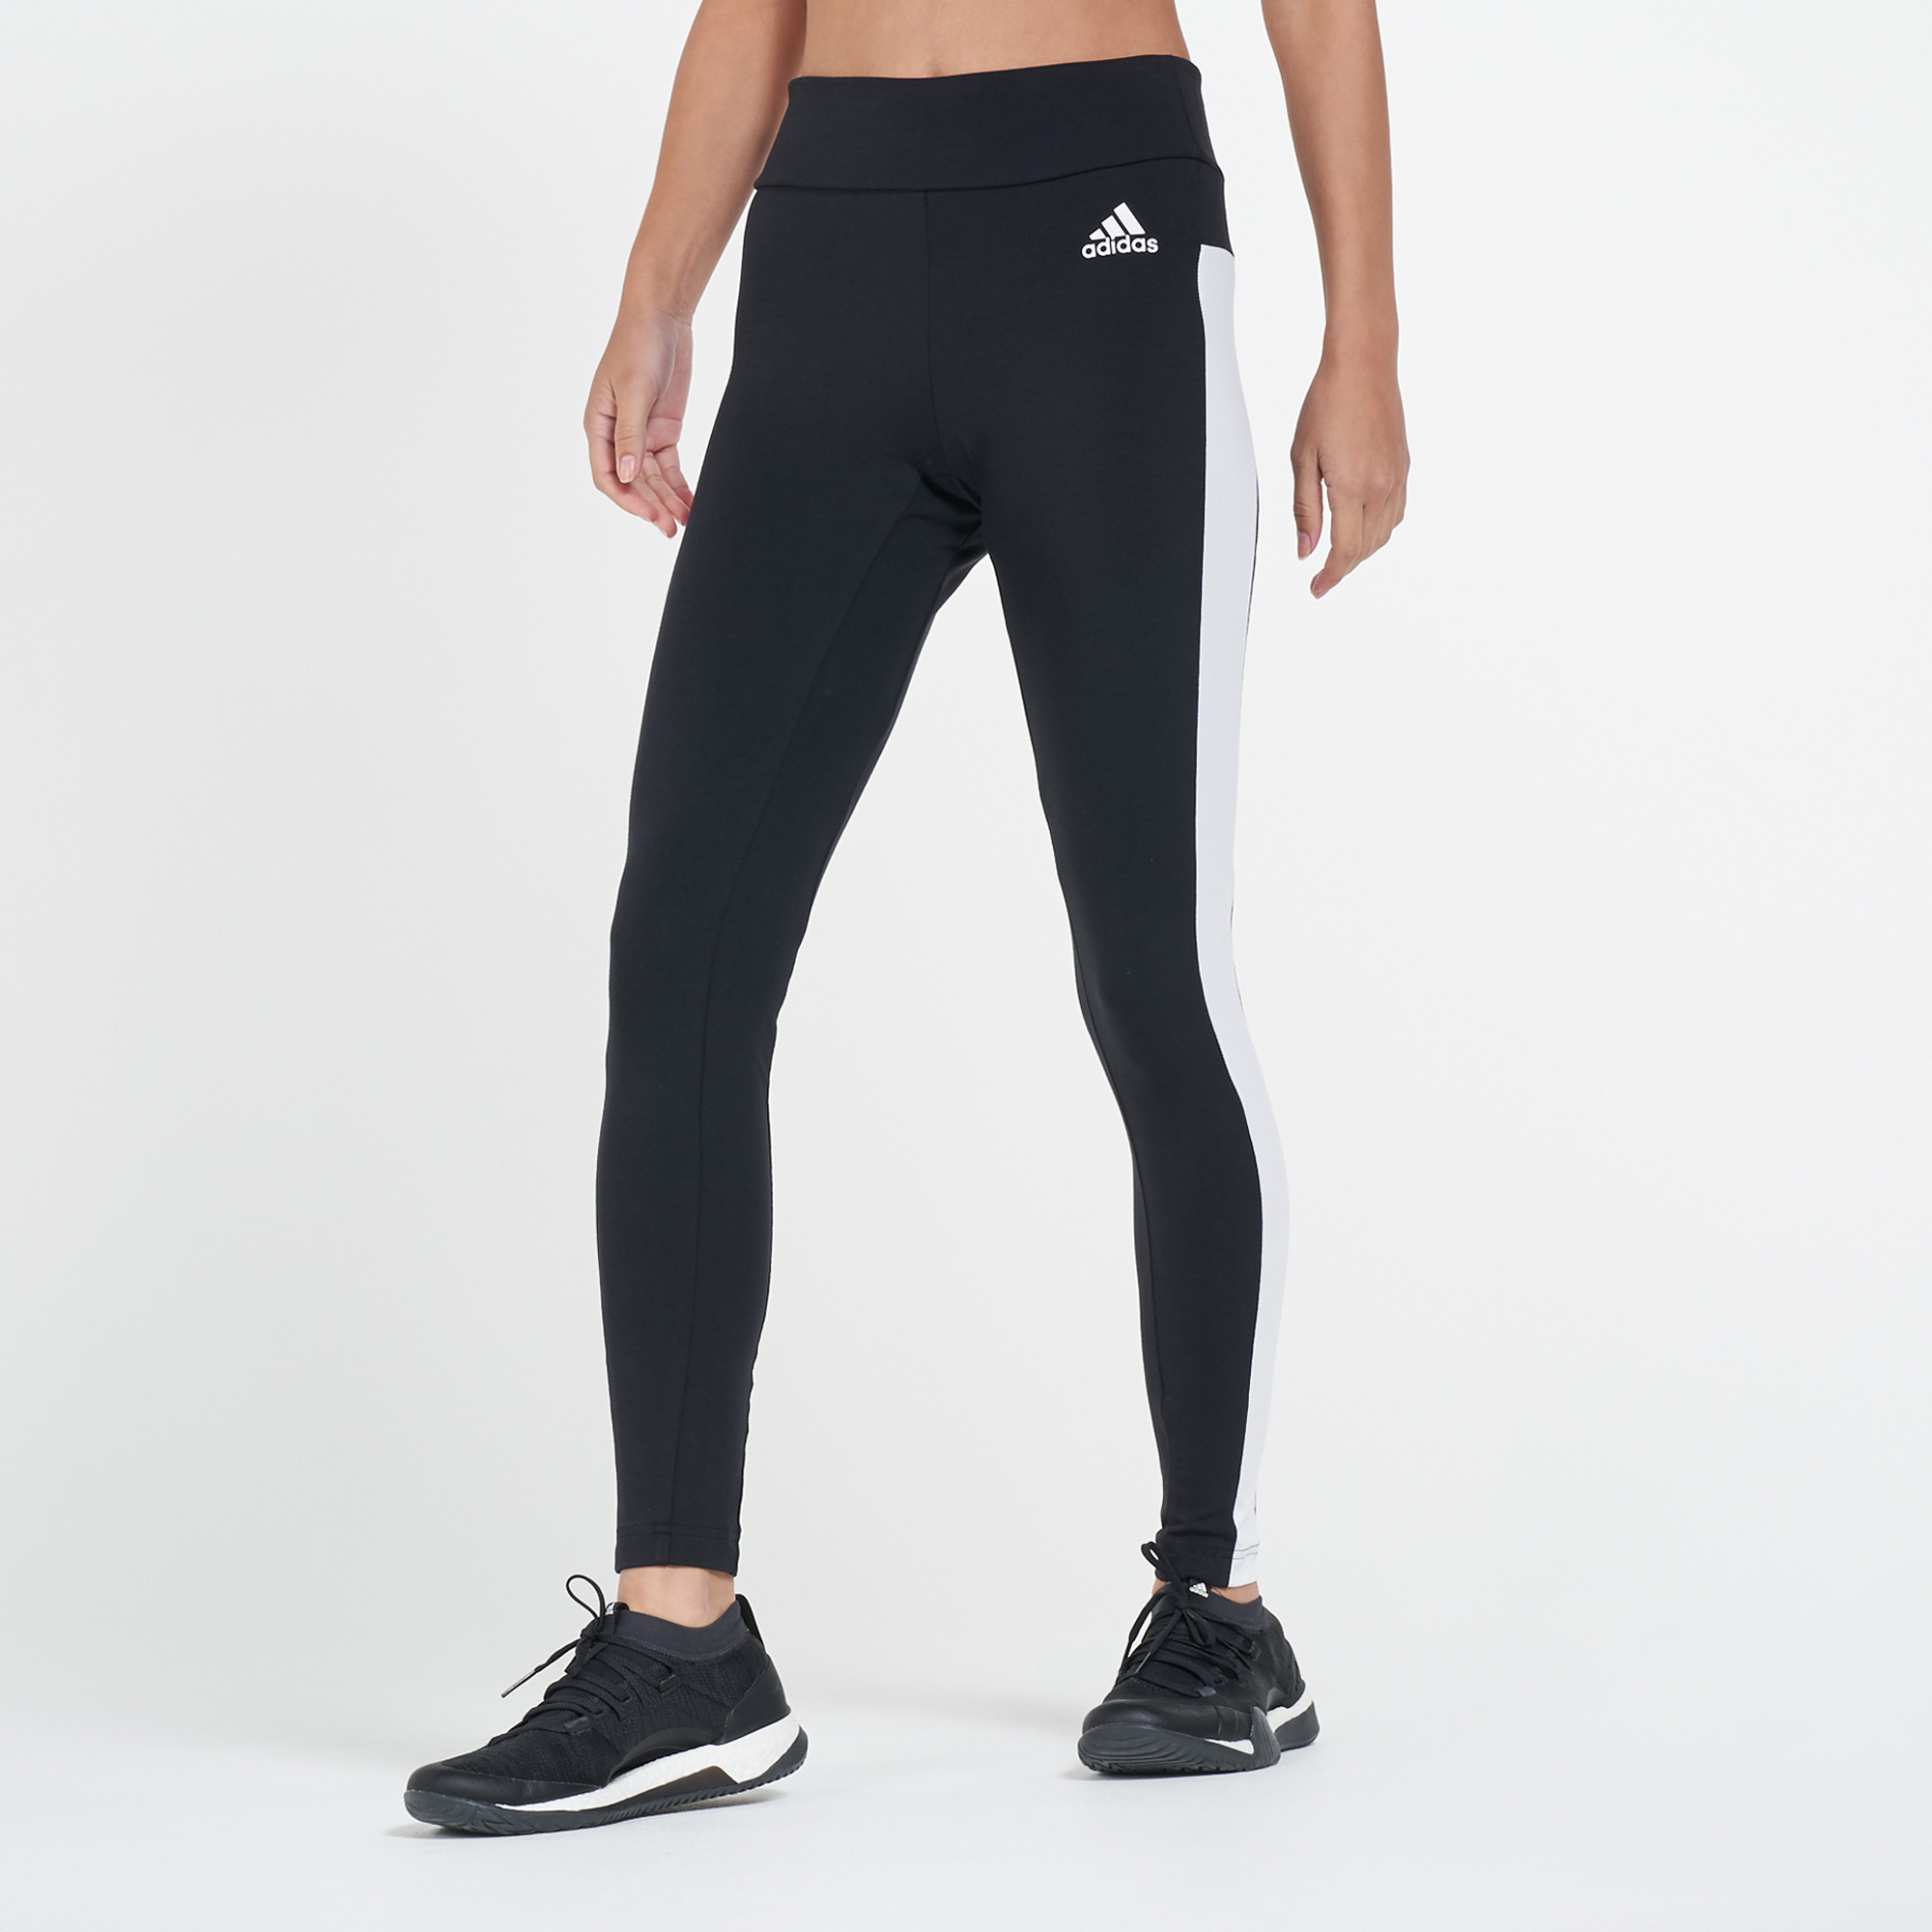 Adidas Yoga Pants India  International Society of Precision Agriculture